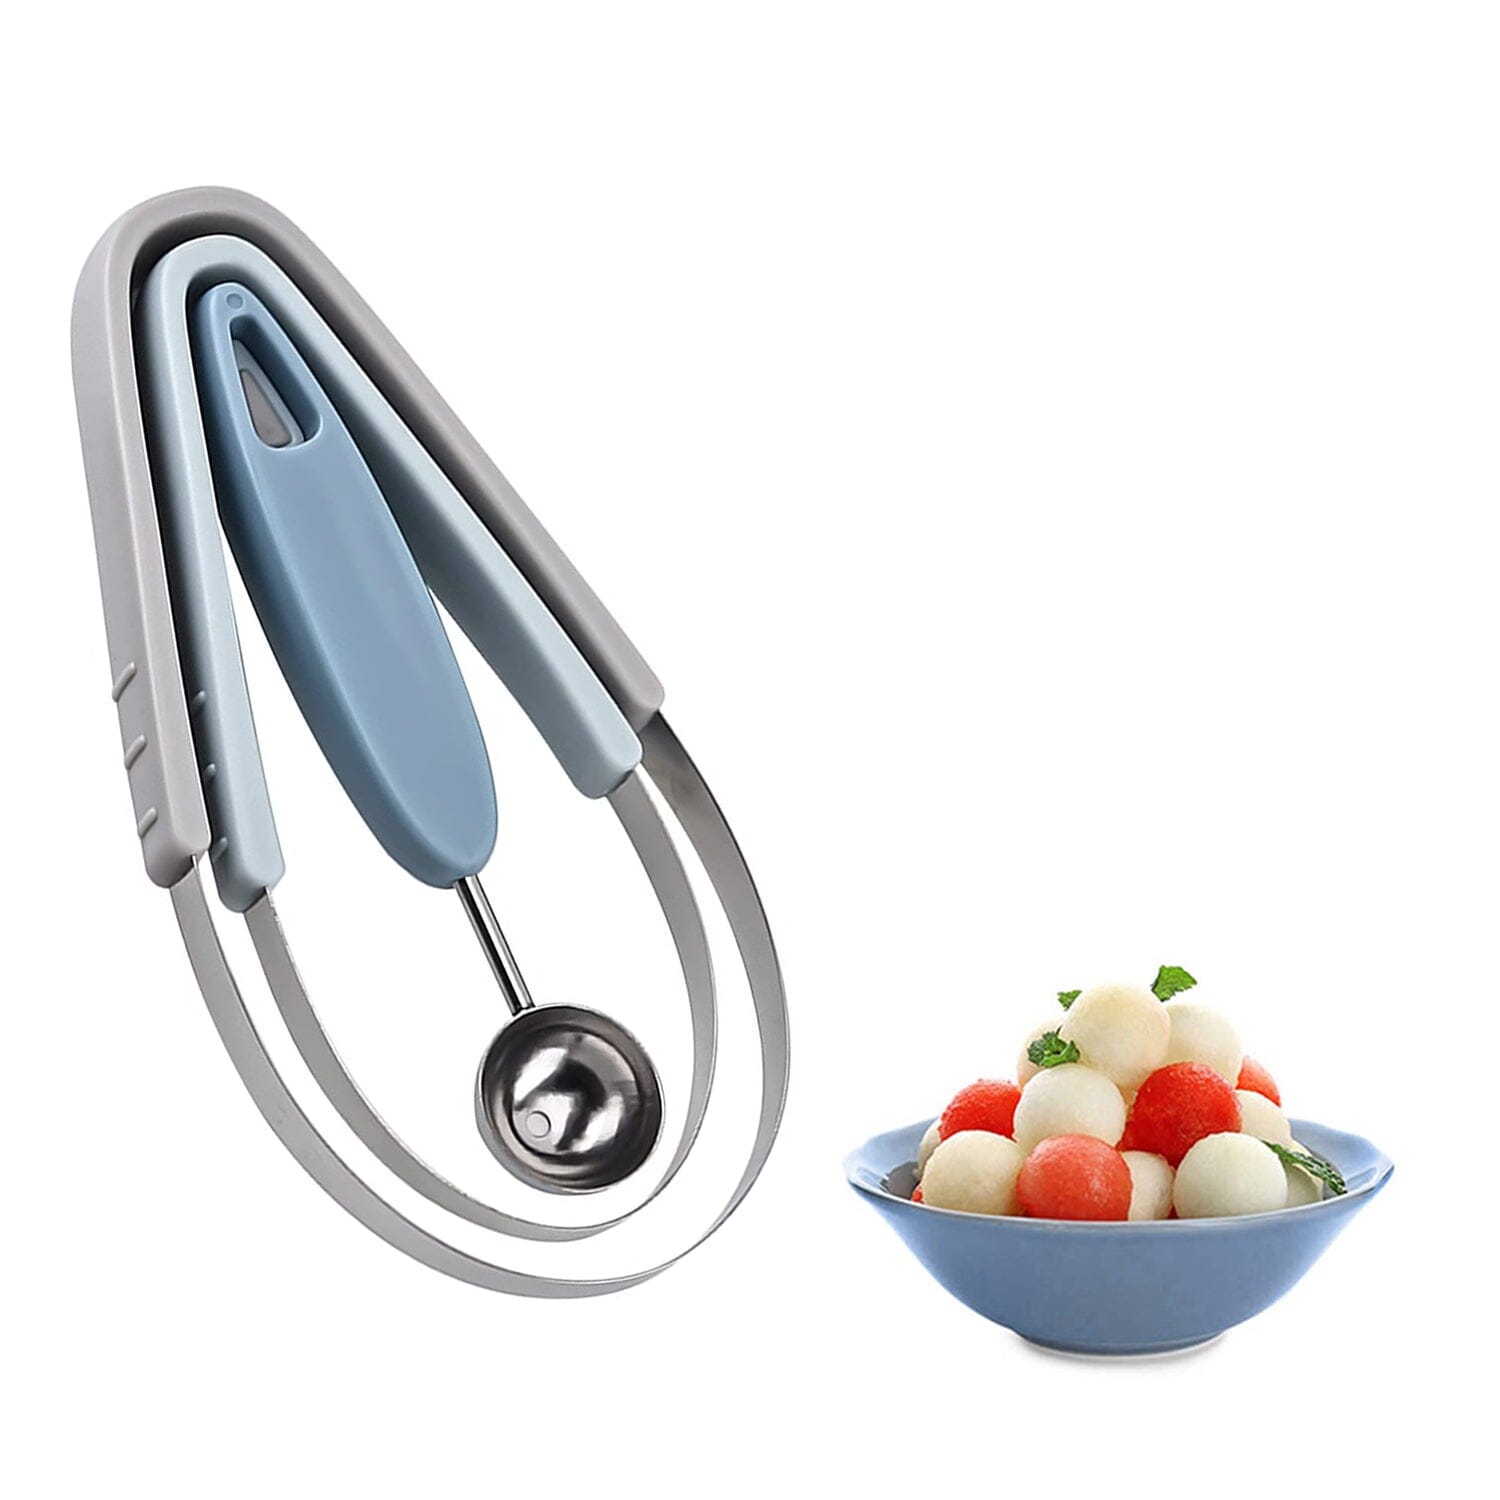 Shop for 3 in 1 Melon Baller Scoop + Fruit Peeler + Carving Knife for  Fruits Ice Cream Cookie Dough Butter Stainless Steel Kitchen Gadget Tool at  Wholesale Price on